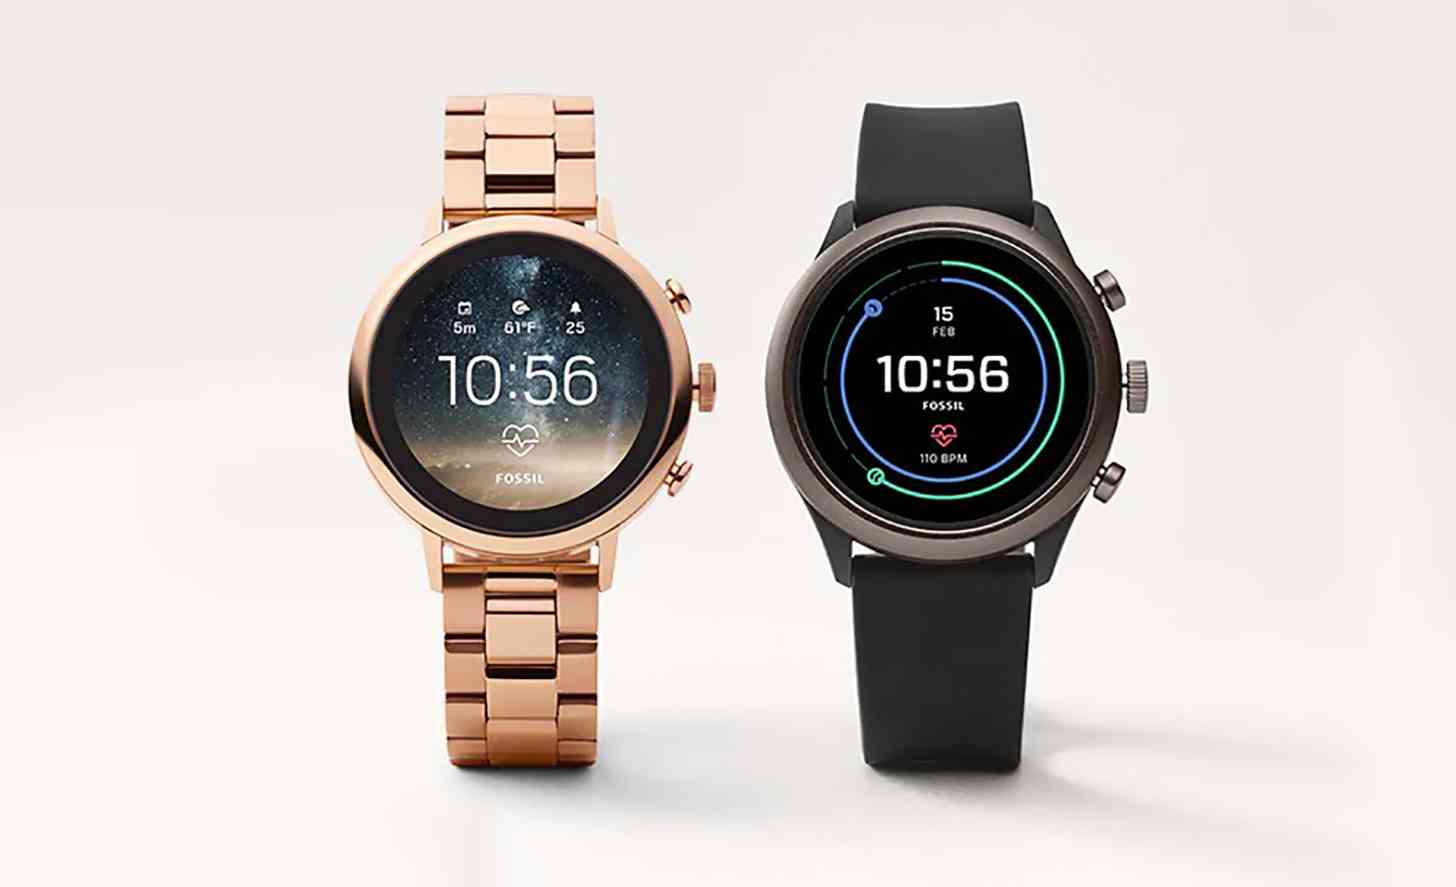 Fossil Wear OS smartwatches